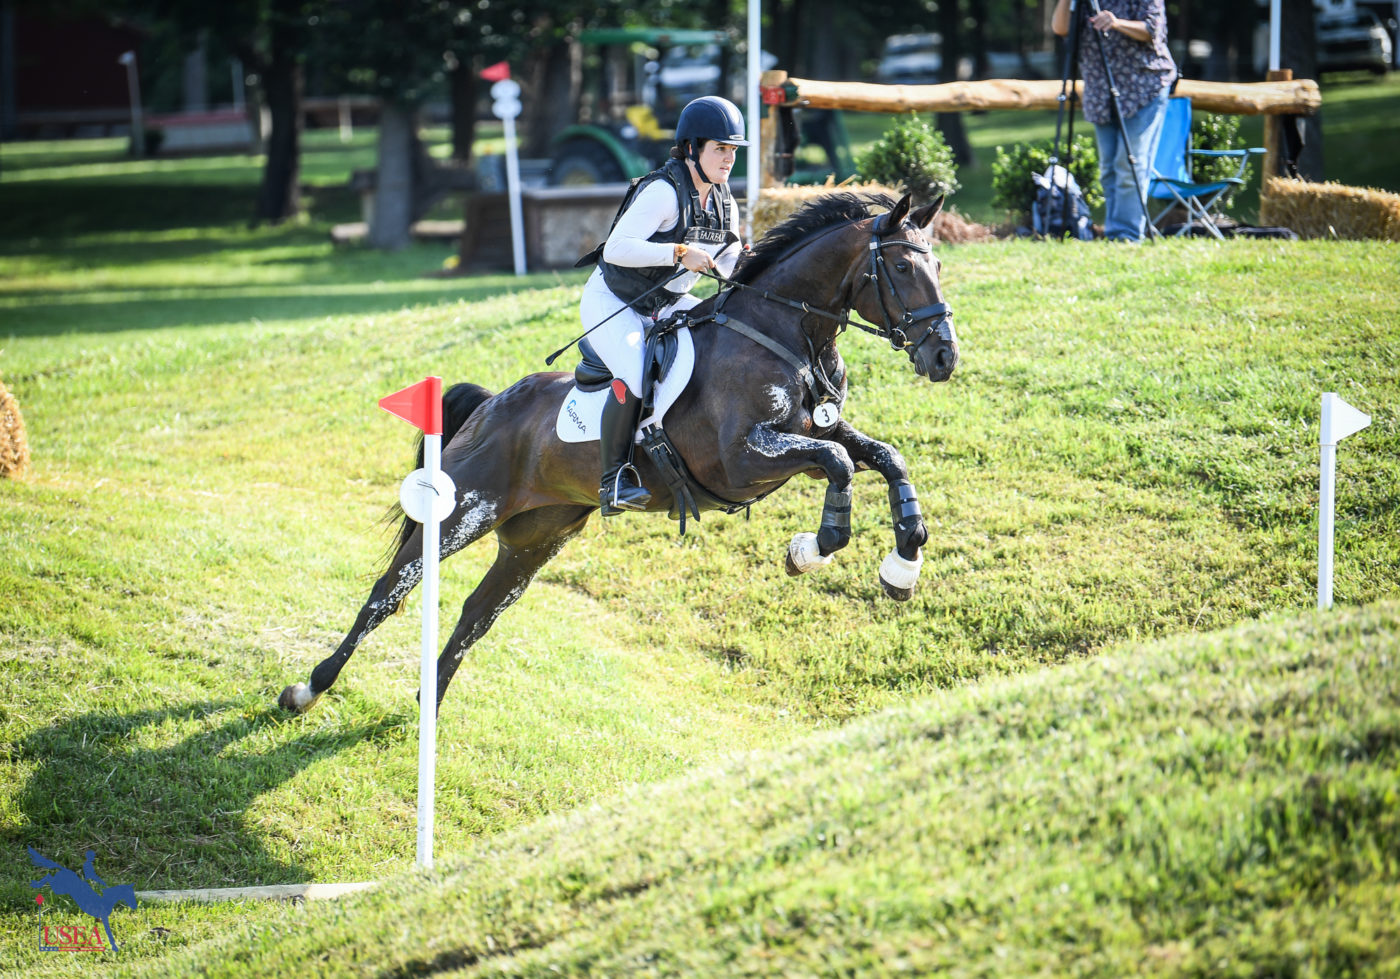 Ema Klugman and RF Redfern jump the new coffin complex in the CCI4*-S. USEA/Lindsay Berreth photo